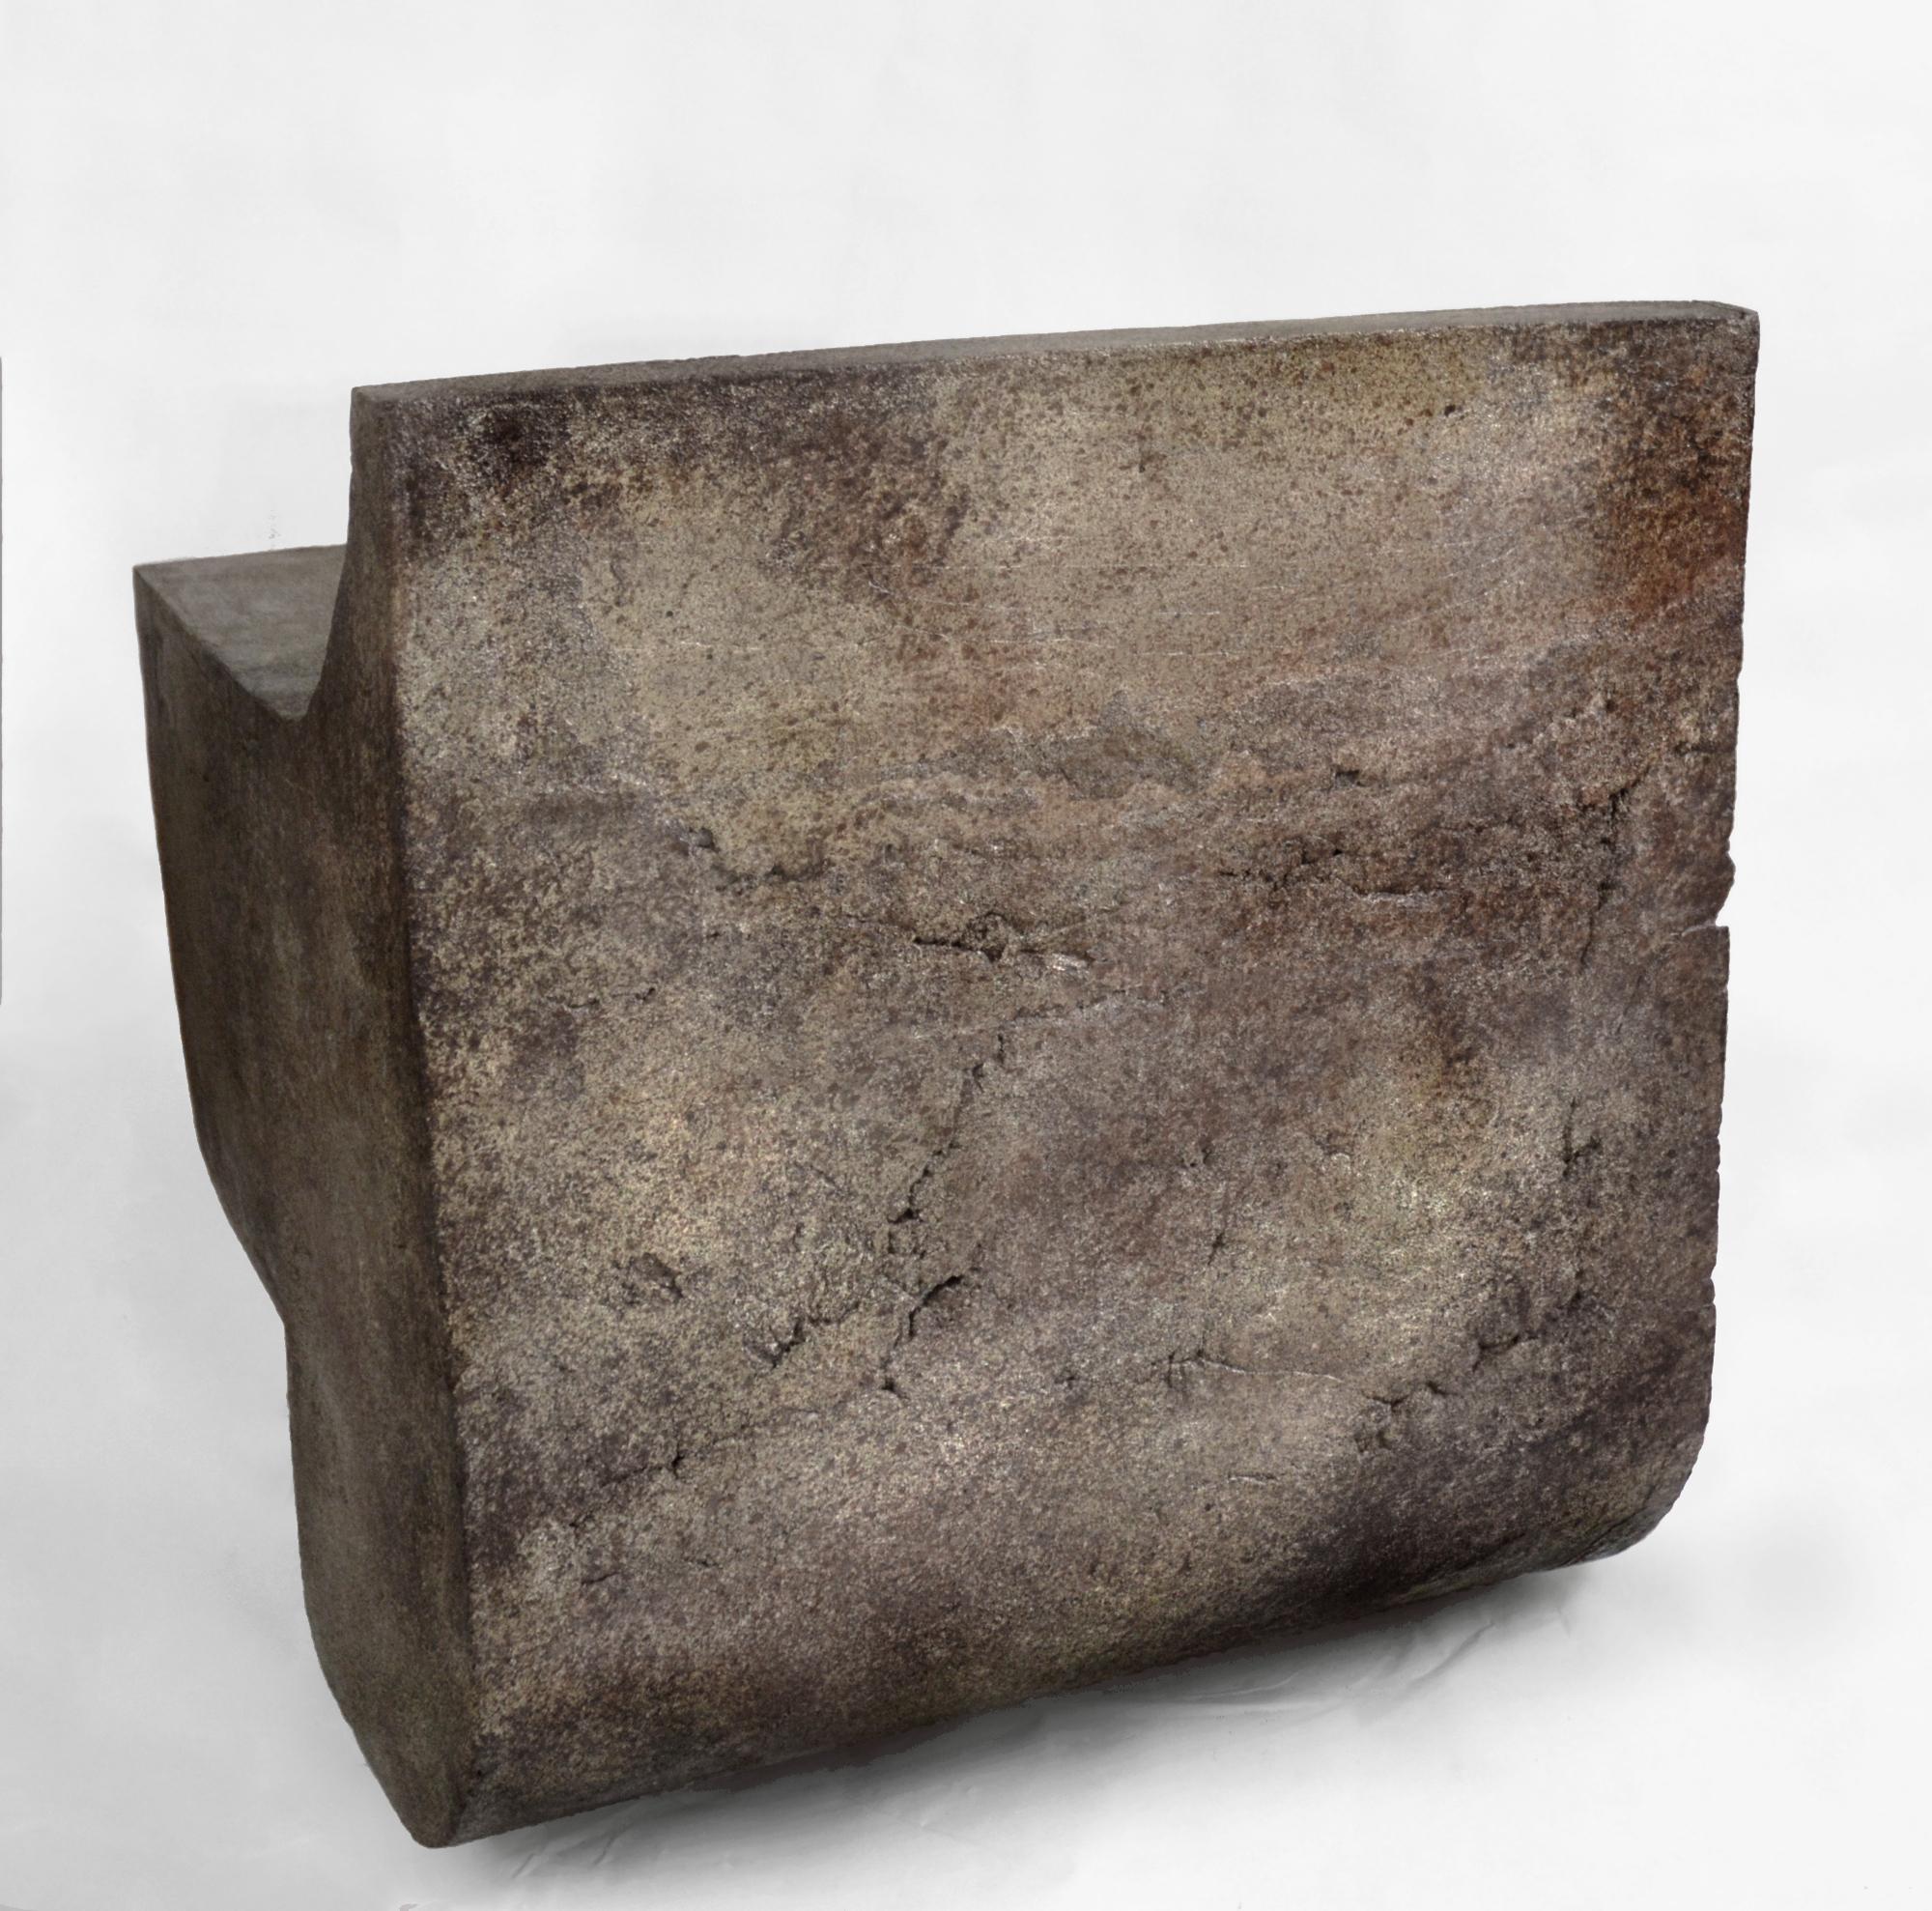 Mono block chair, Isac Elam Kaid
Each Chair is unique and hand-sculpted by Isac Elam Kaid
Dimensions: 50 W x 61 D x 61 H cm
Materials: casting cement, epoxy resin, mixed-media

Isac Elam Kaid is an artist and designer based in Vancouver.
Isac